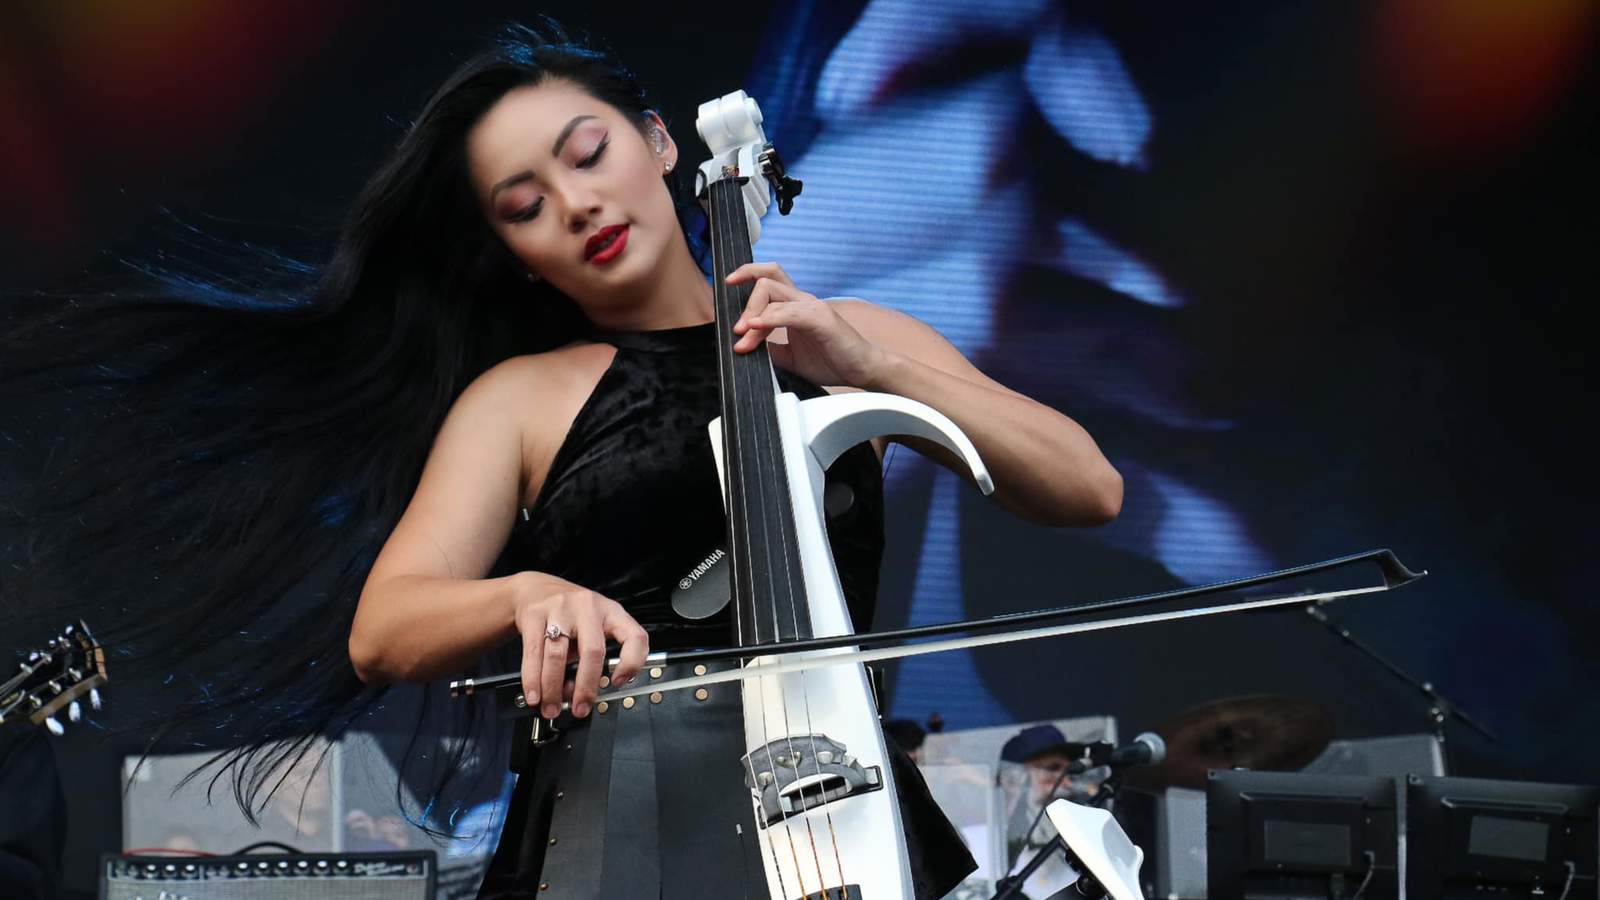 Tina playing the cello live